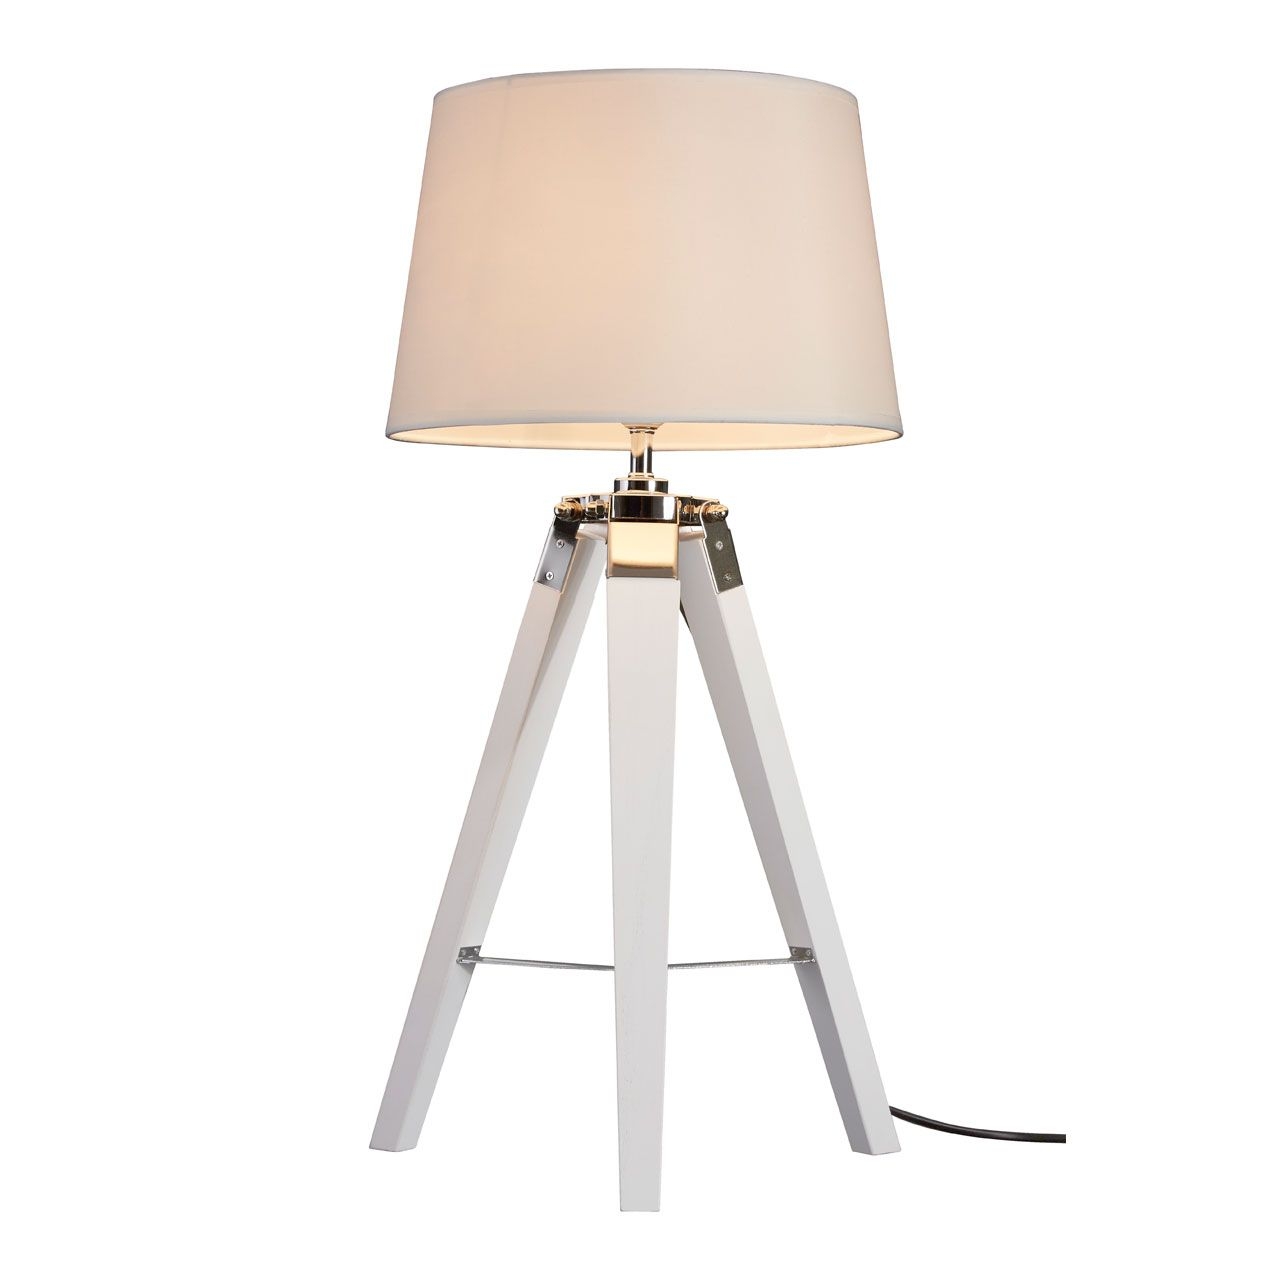 Bailey Cream Fabric Shade Table Lamp With White Wooden Tripod Base